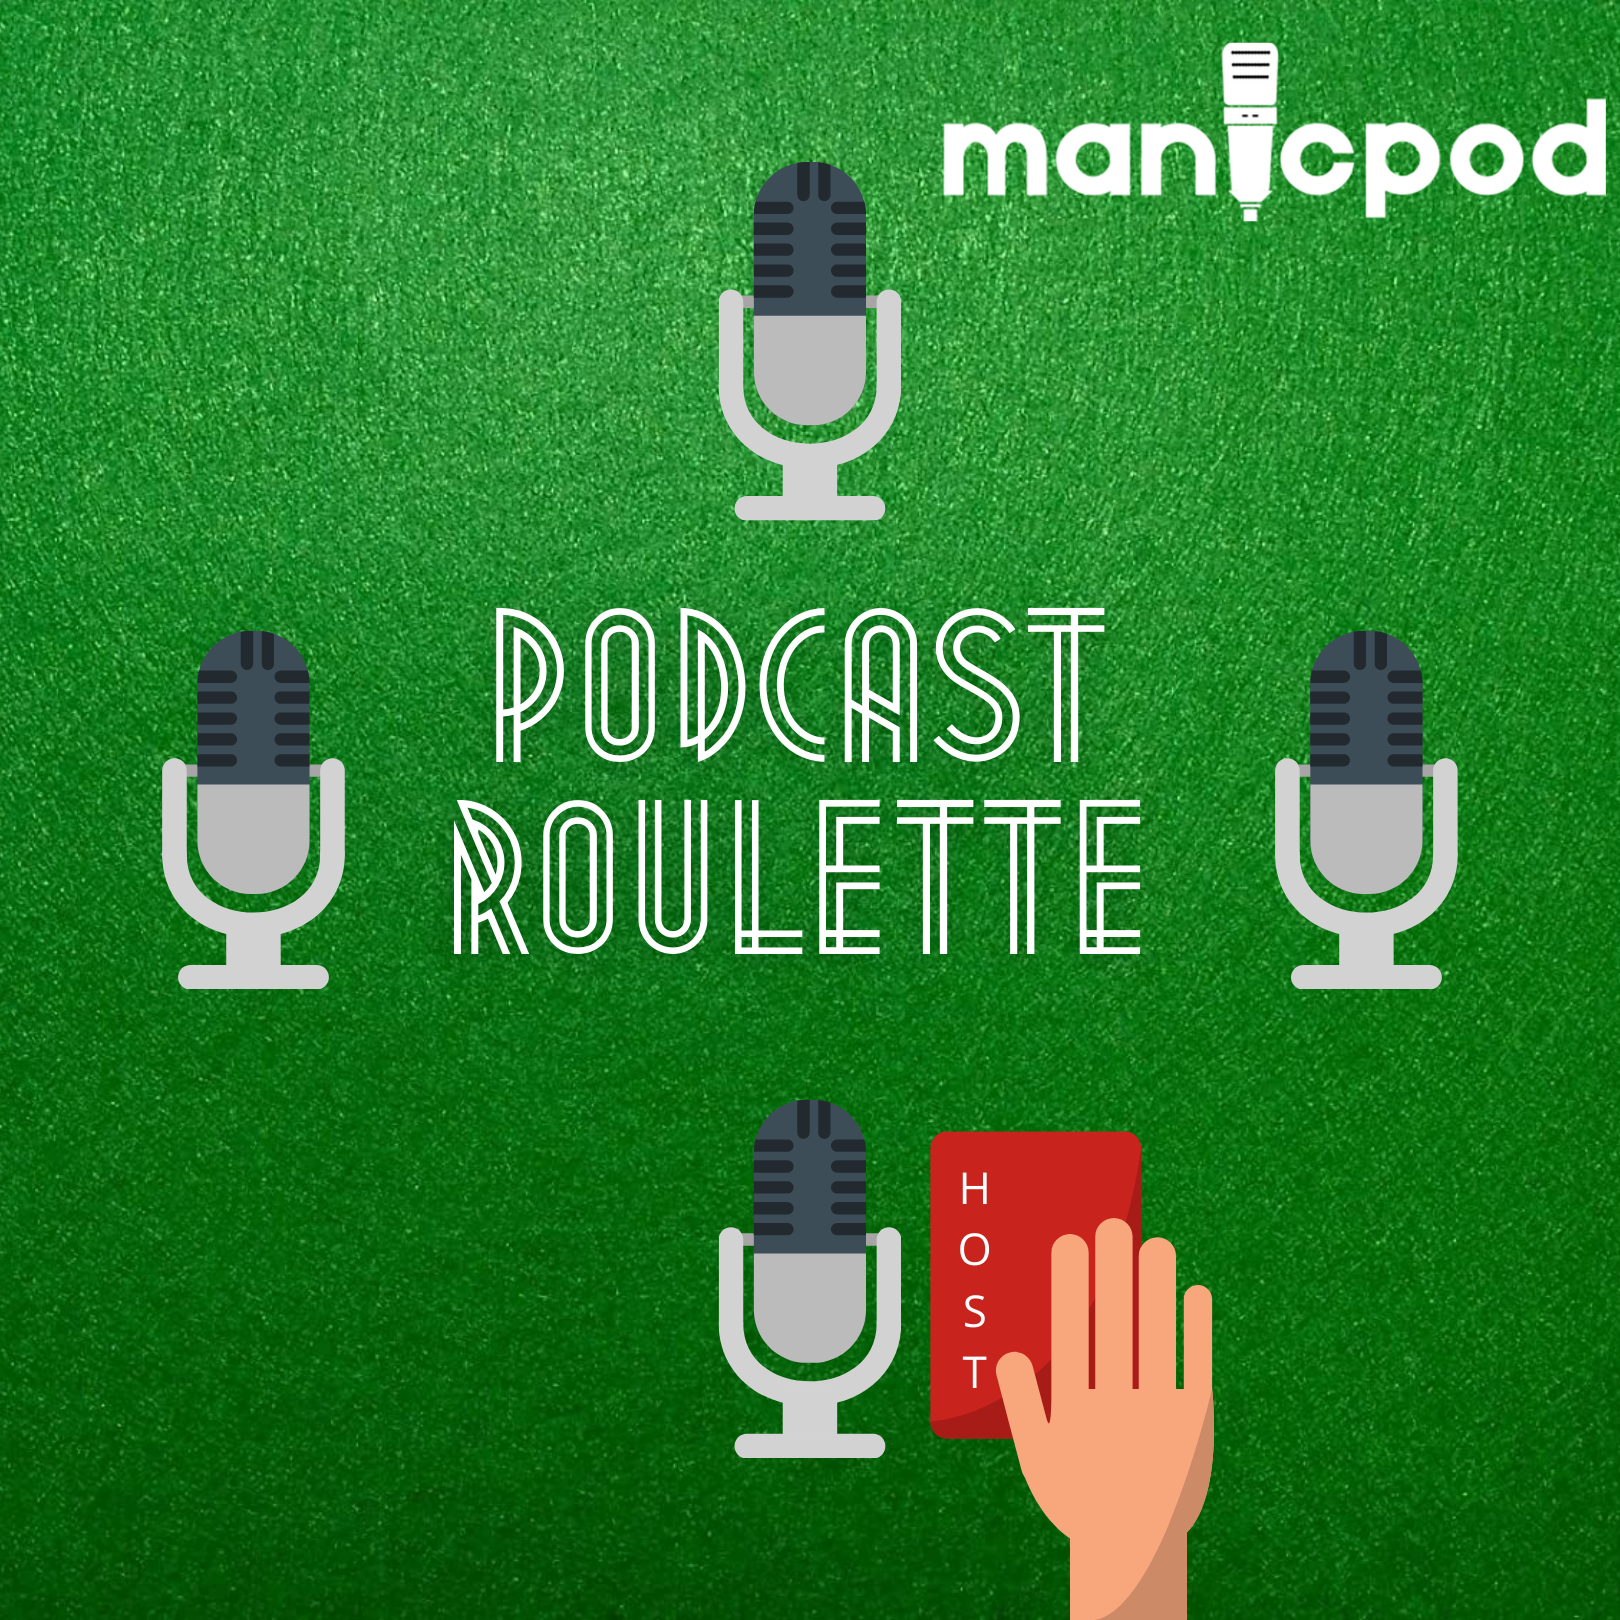 Podcast Roulette